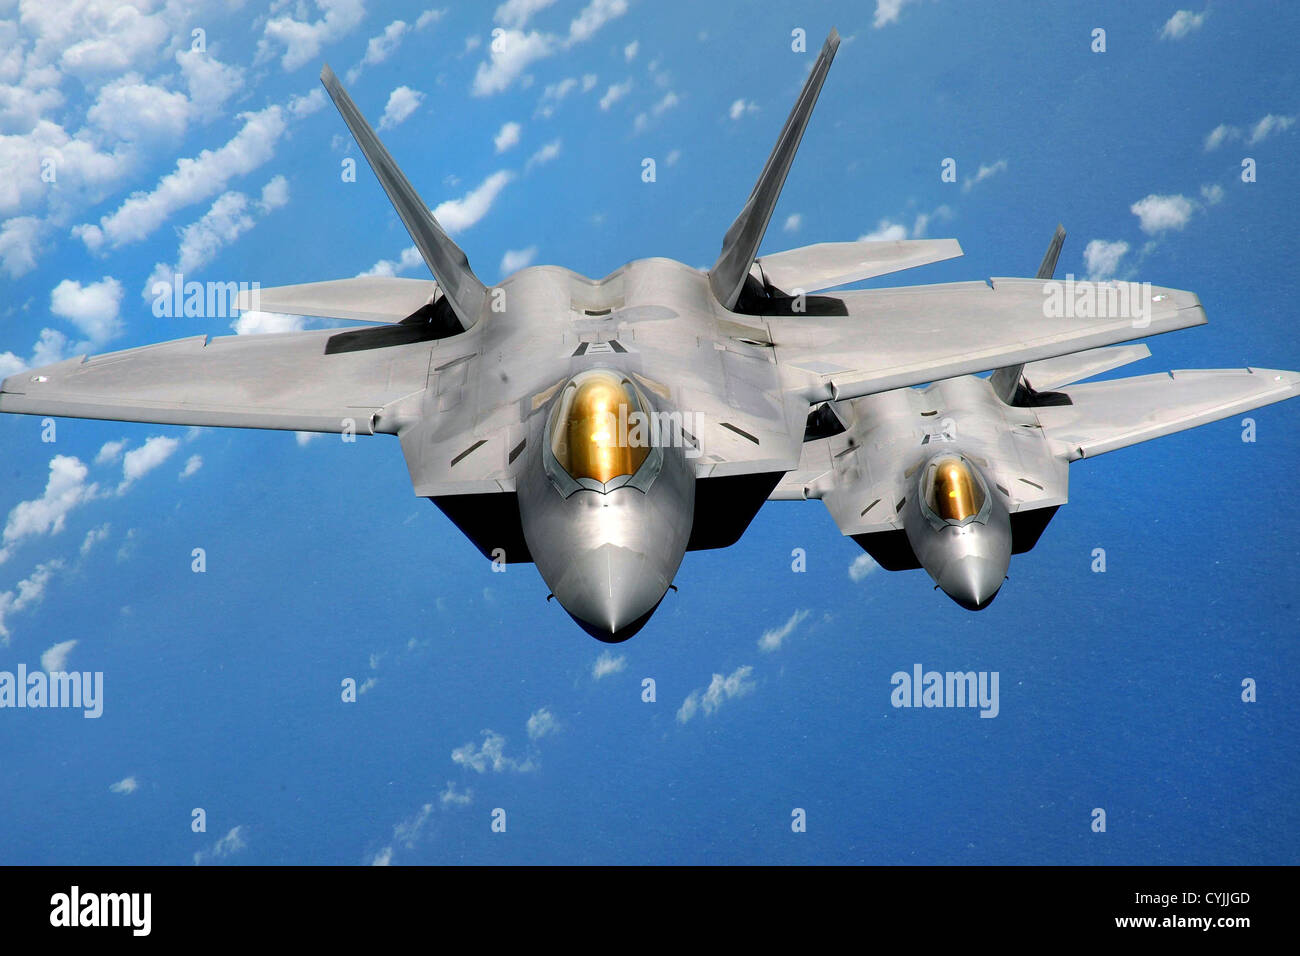 US Air Force F-22 Raptor performs March 9, 2009 over Andersen Air Force Base in Guam. Stock Photo